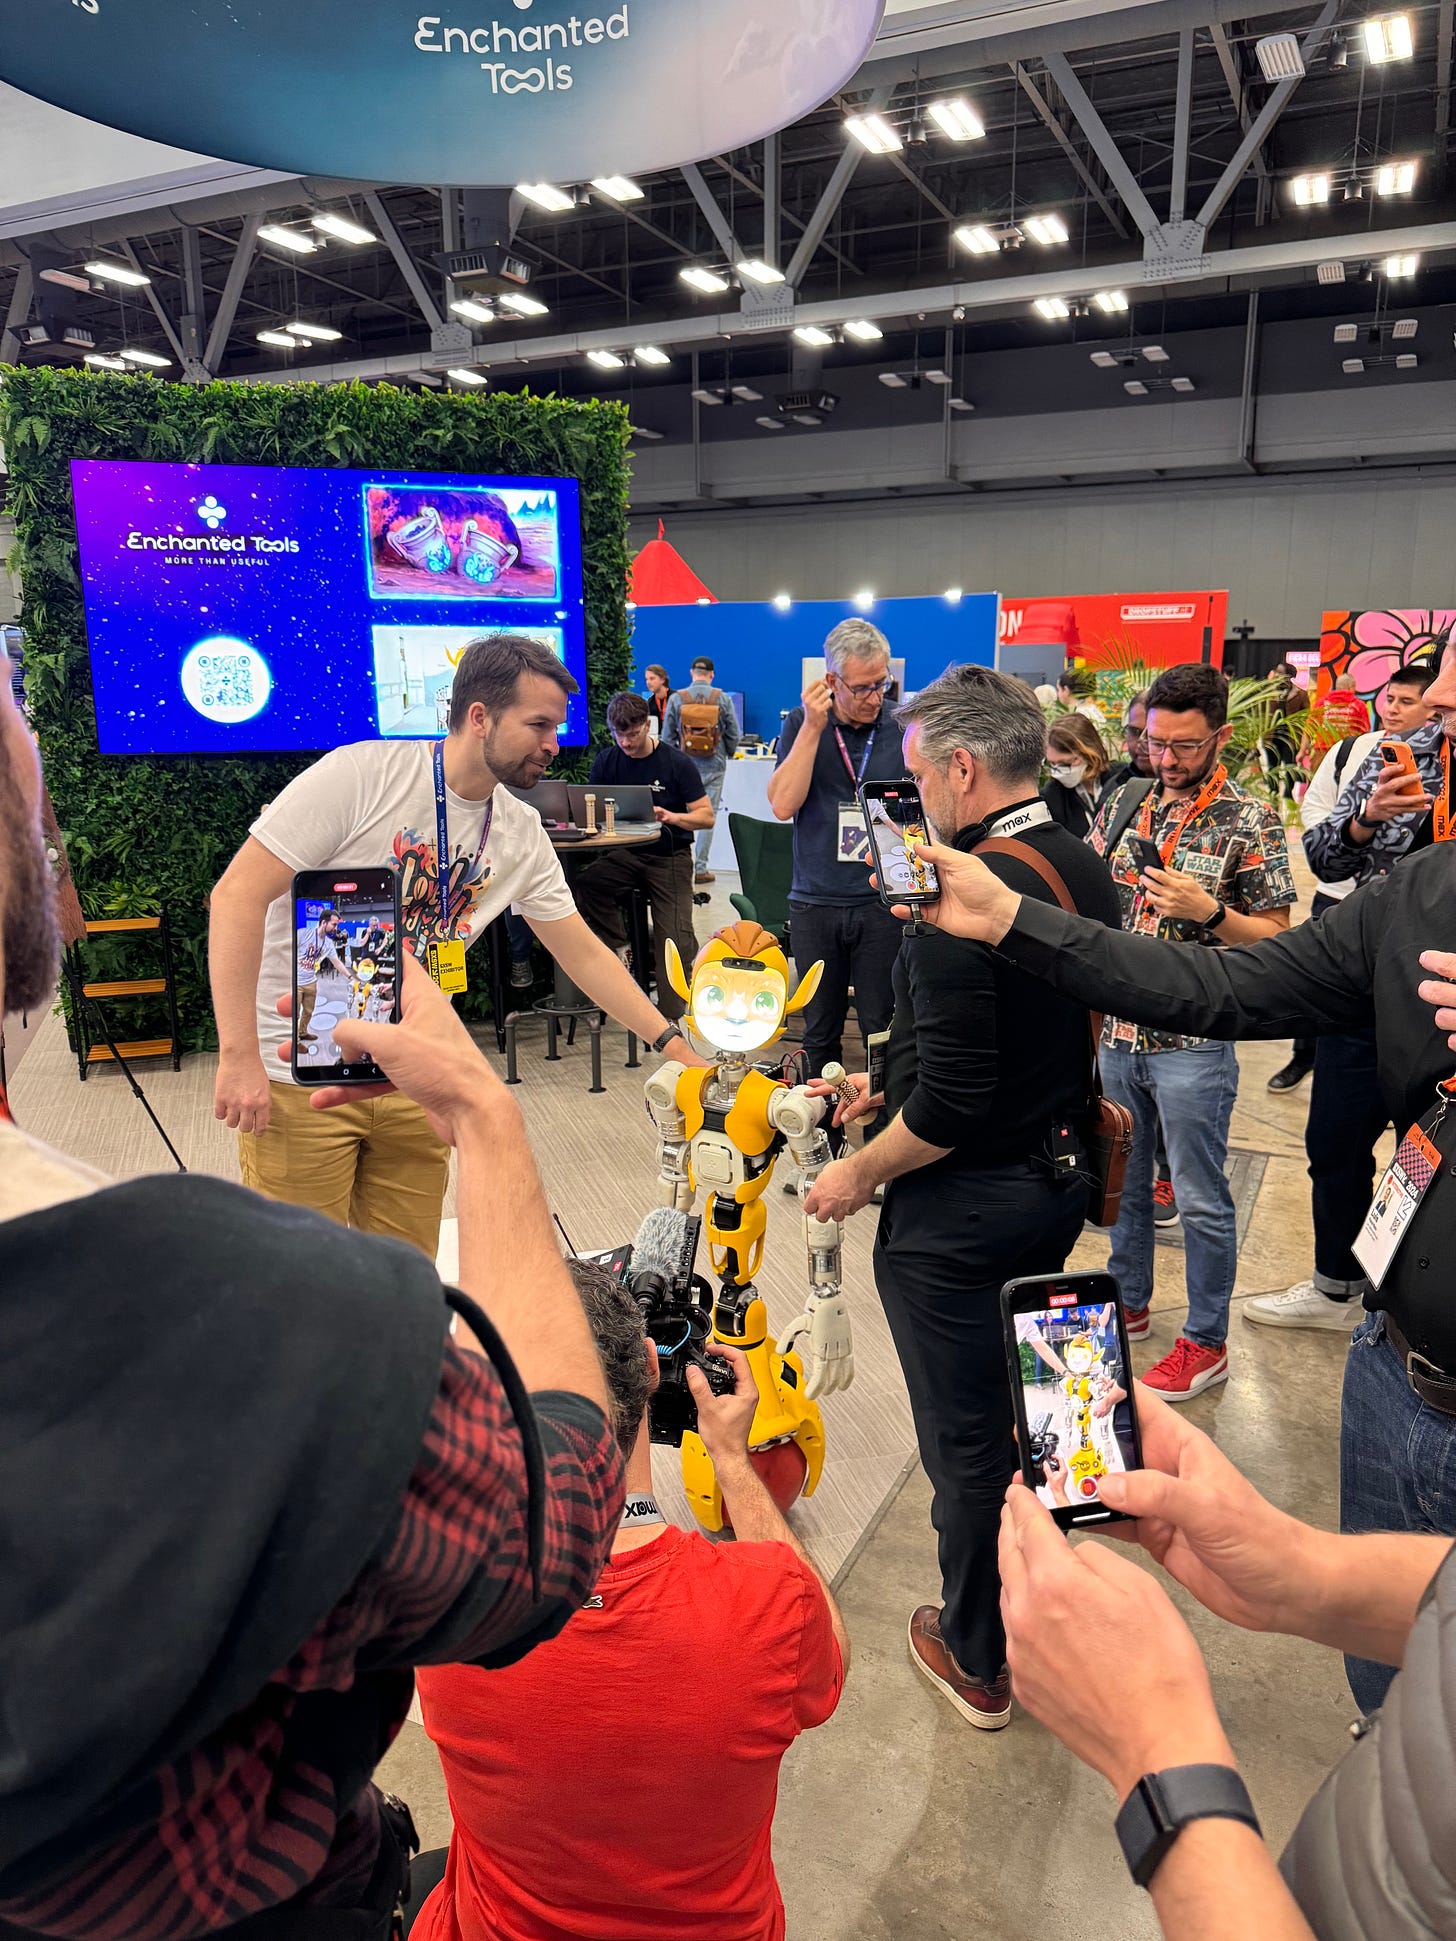 In the exhibition hall, a crowd of SXSW attendees gather around an upright one-wheel robot with a face like a lion. Everyone has their phones out and is snapping photos/videos. The company logo "Enchanted Tools" is in the background.